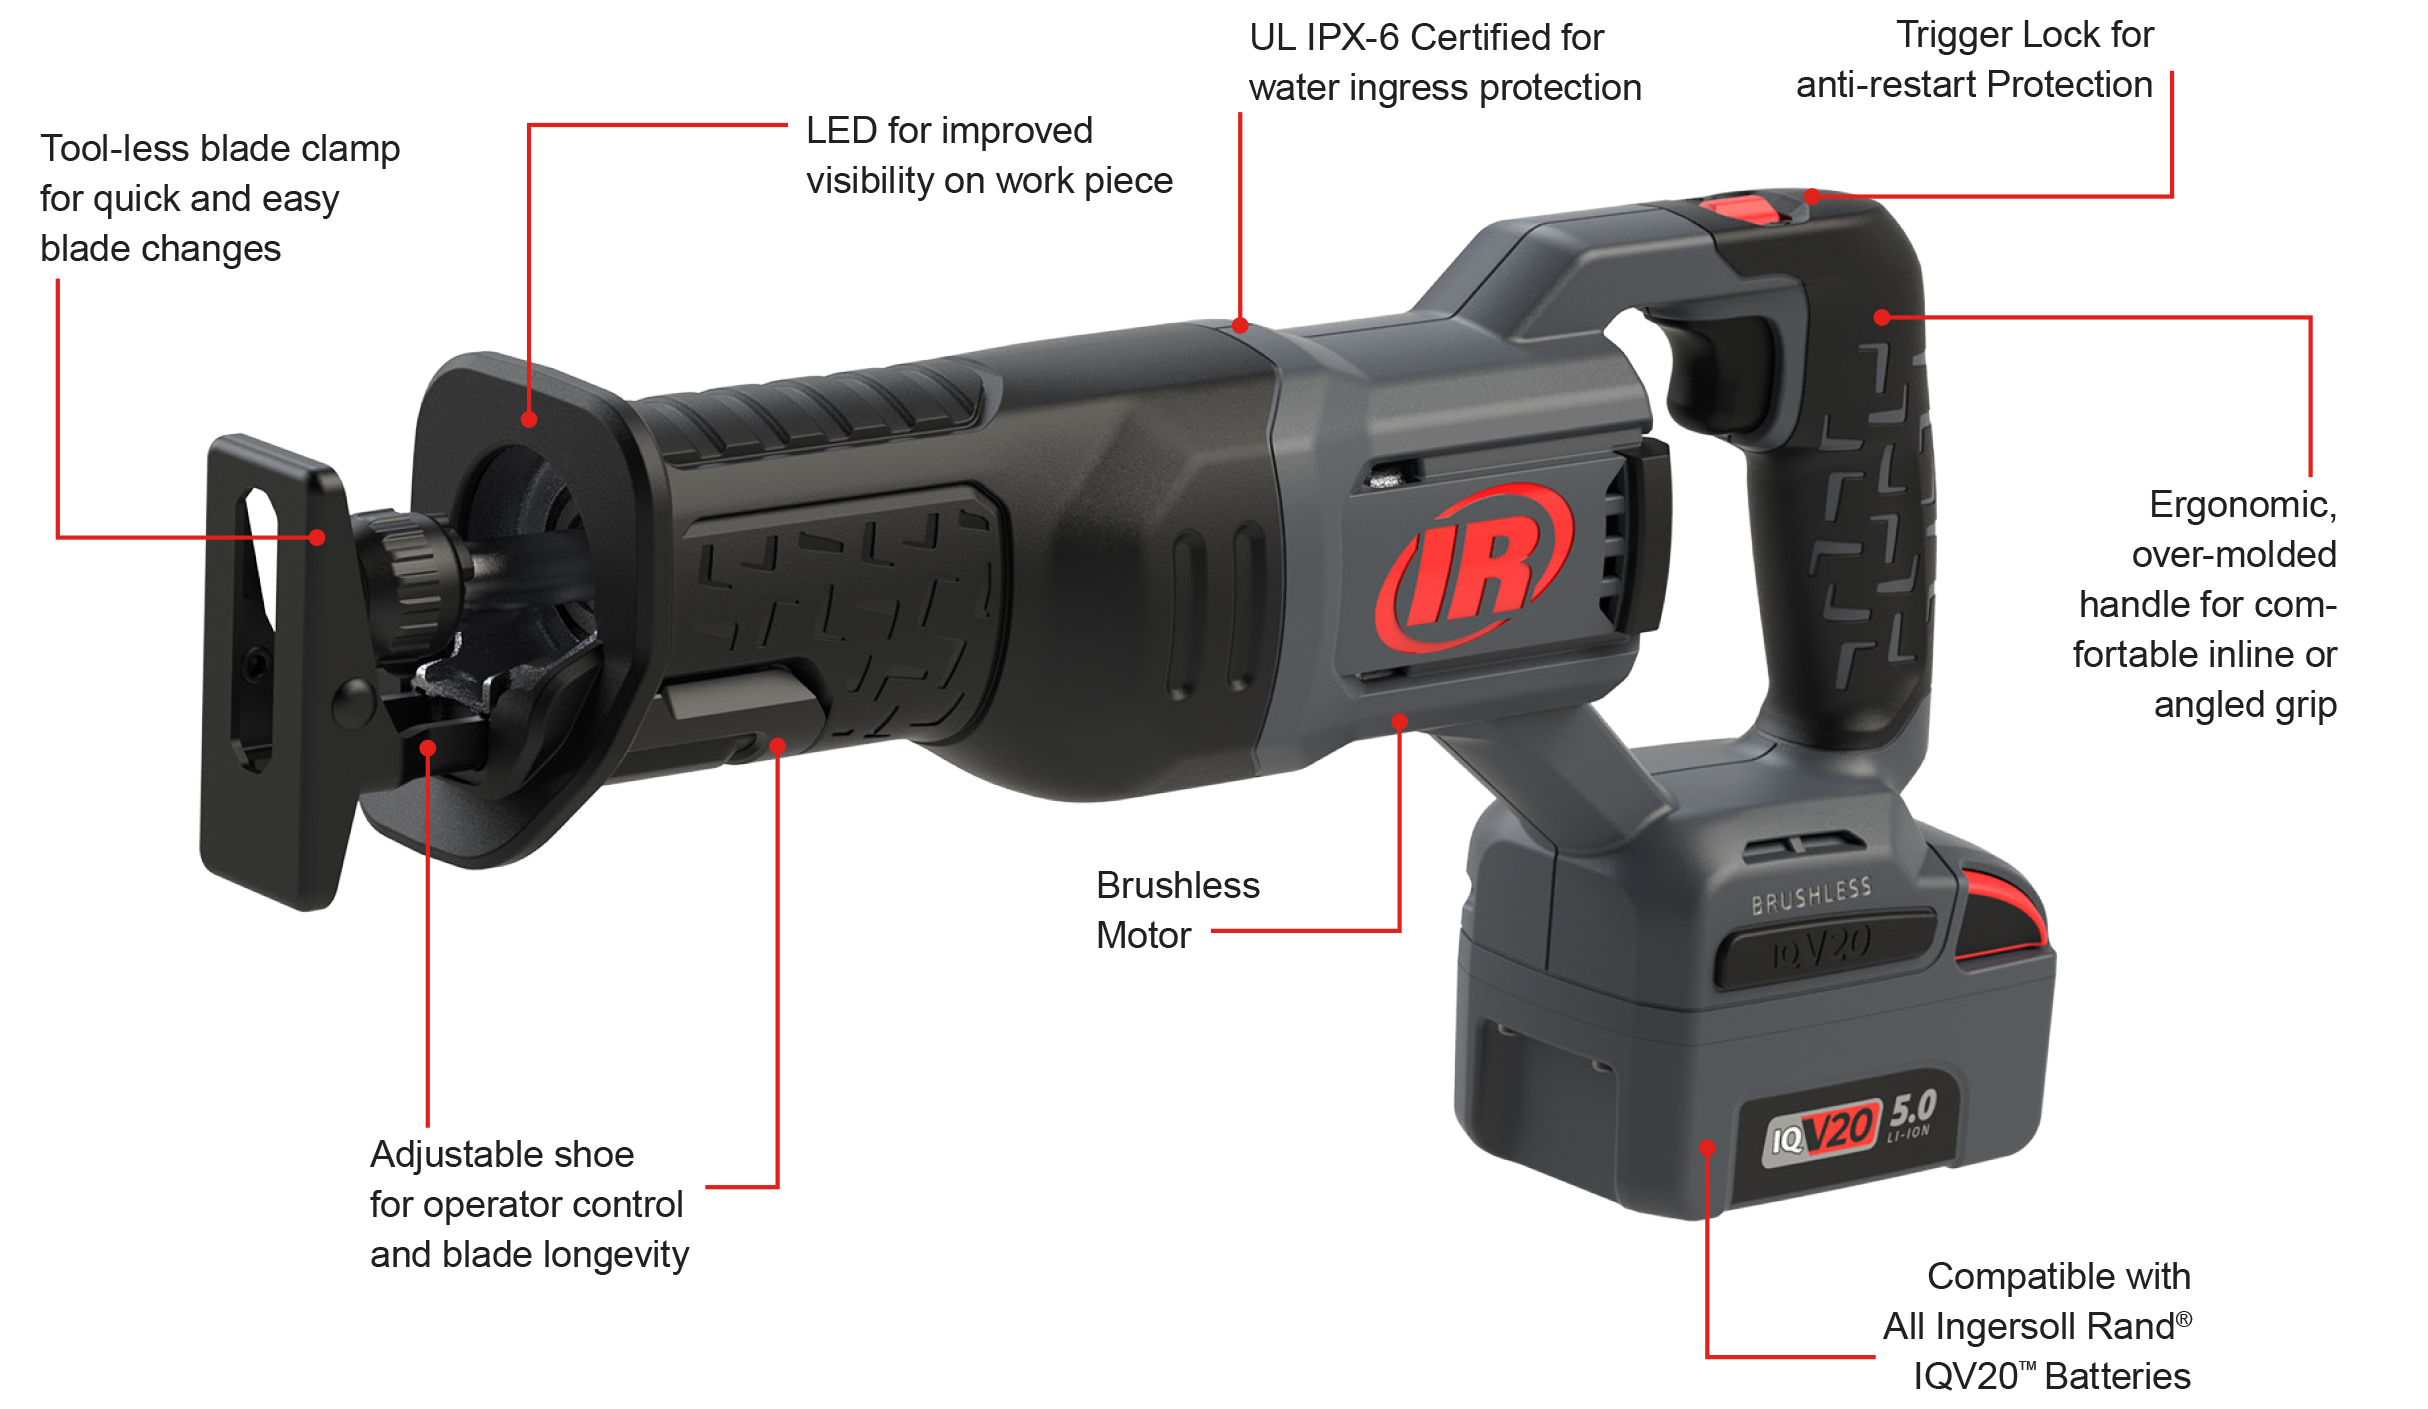 Cordless recip saw features a brushless motor, trigger lock for anti-restart protection, comfortable grip, table shoe,  tool-less blade clamp, and is compatible with all IR IQV20 batteries.